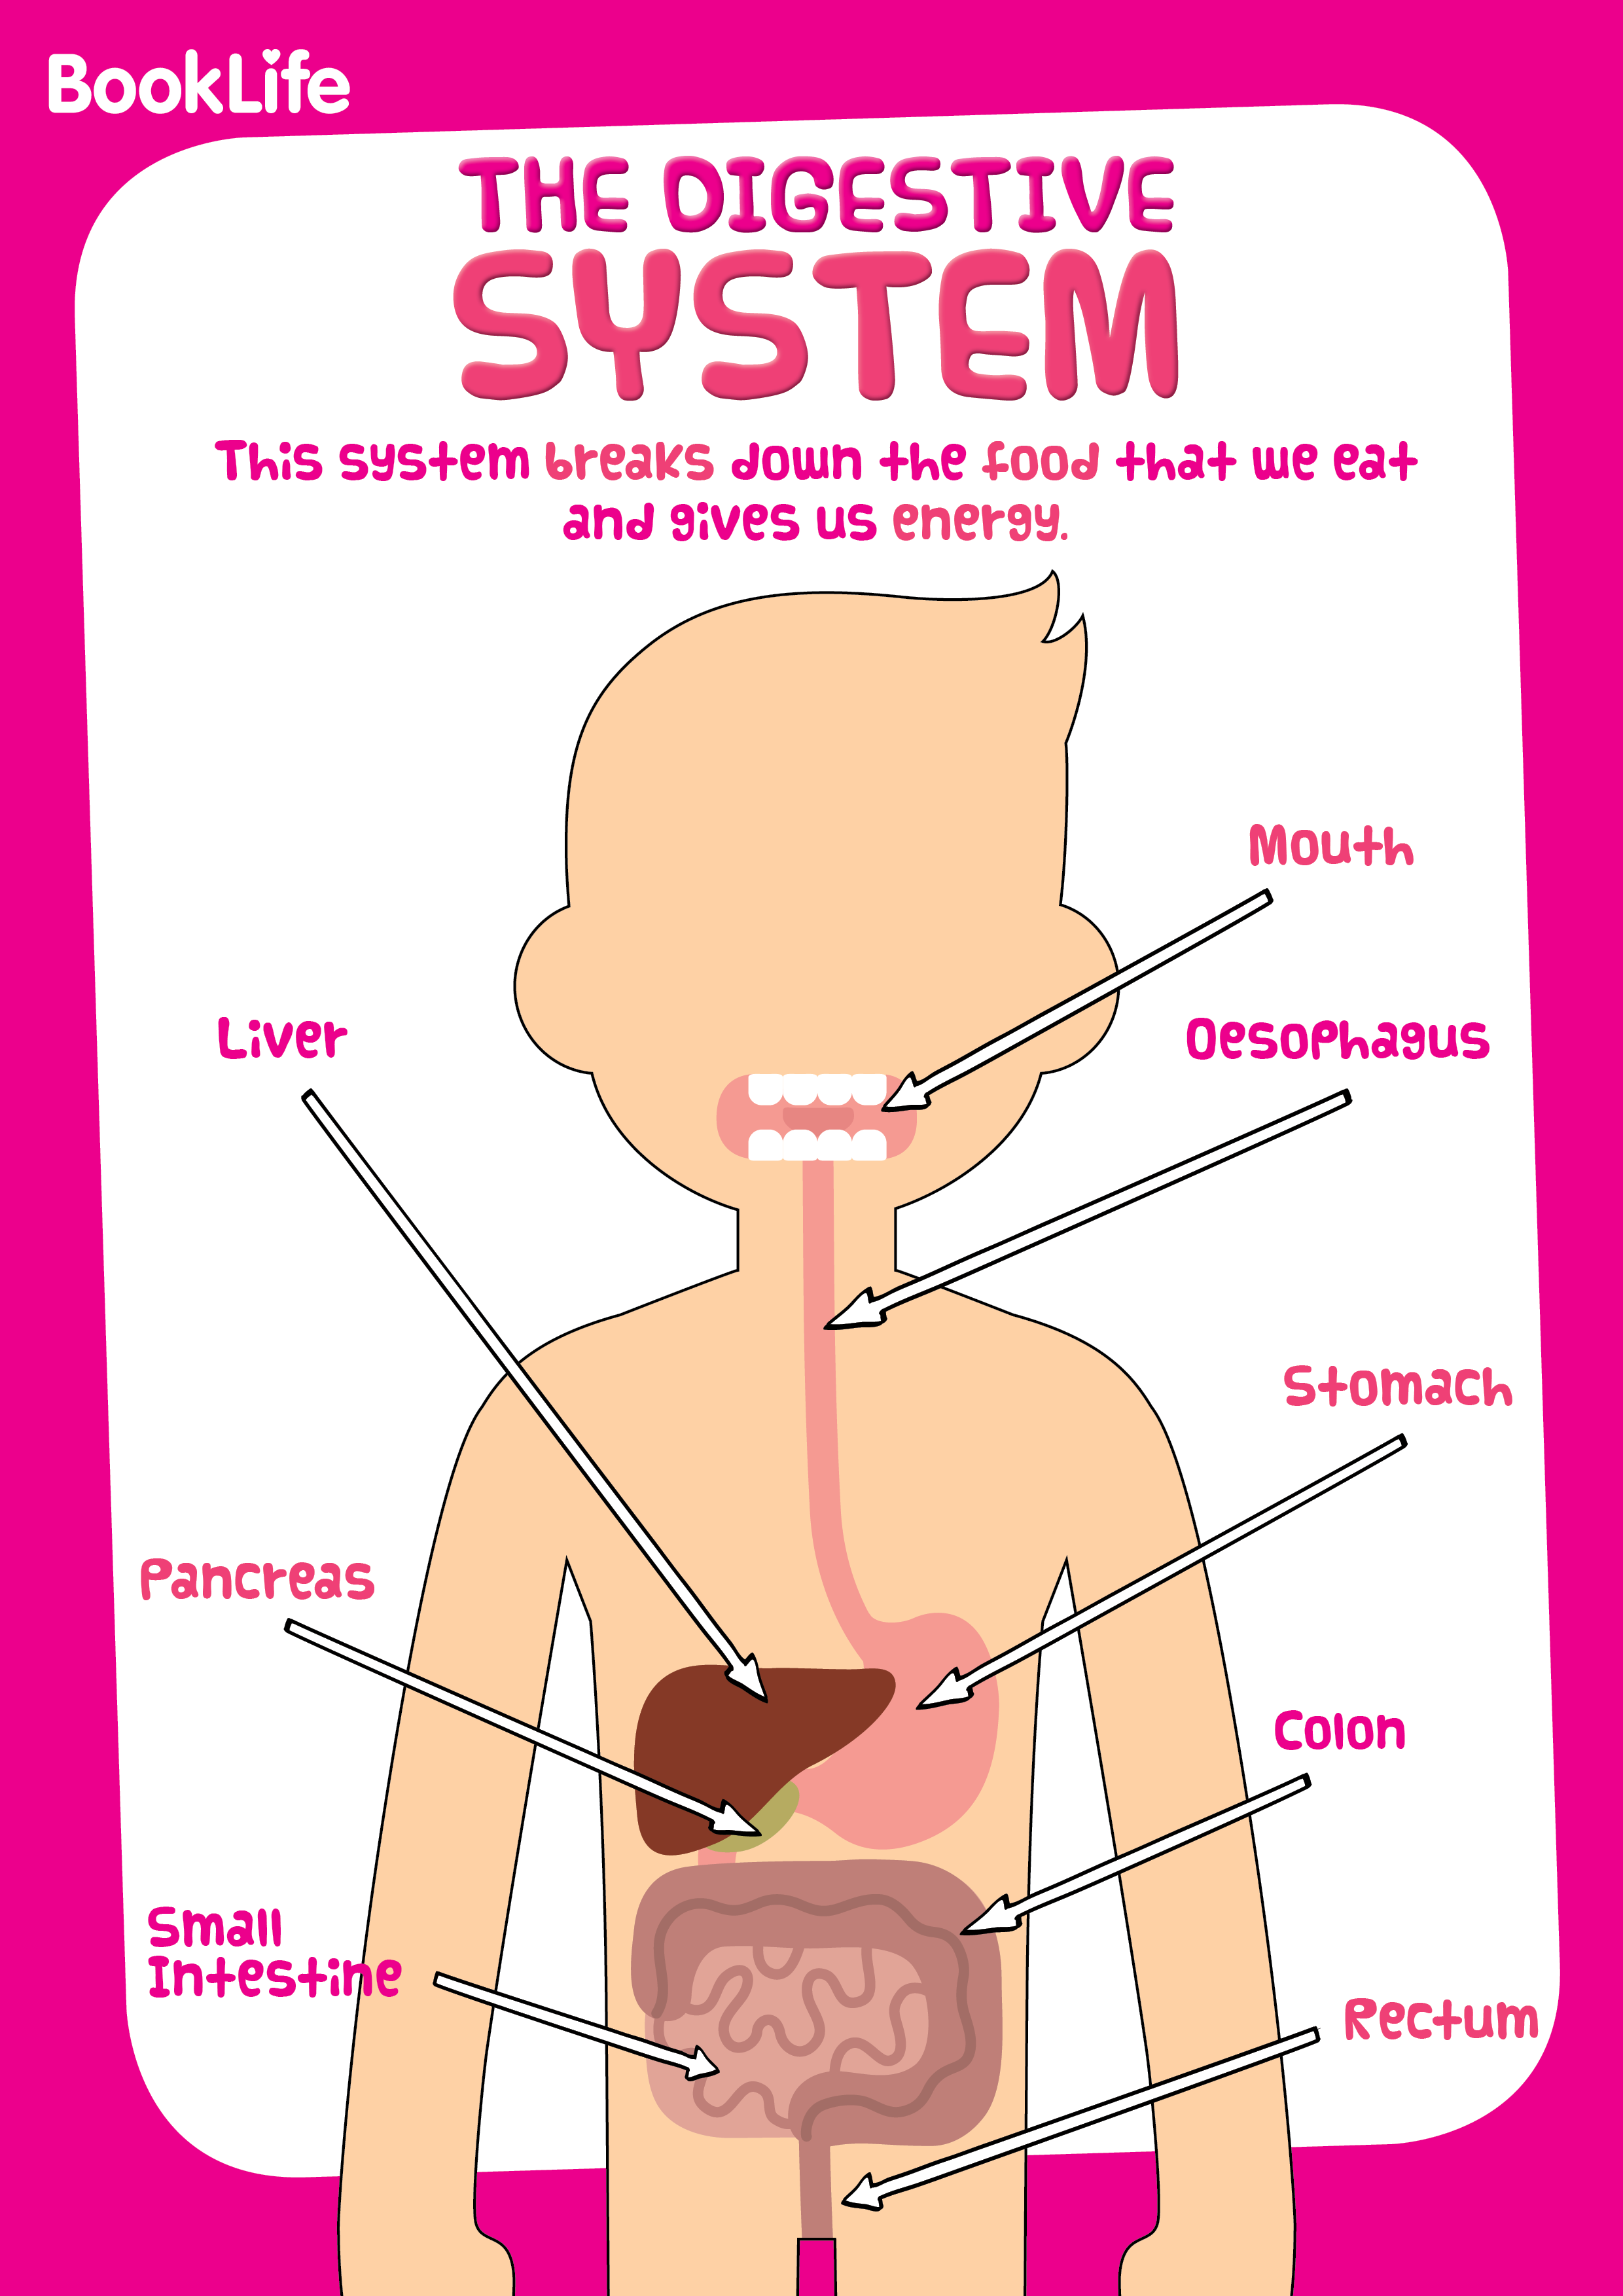 Free Human Body System Poster - Digestive by BookLife